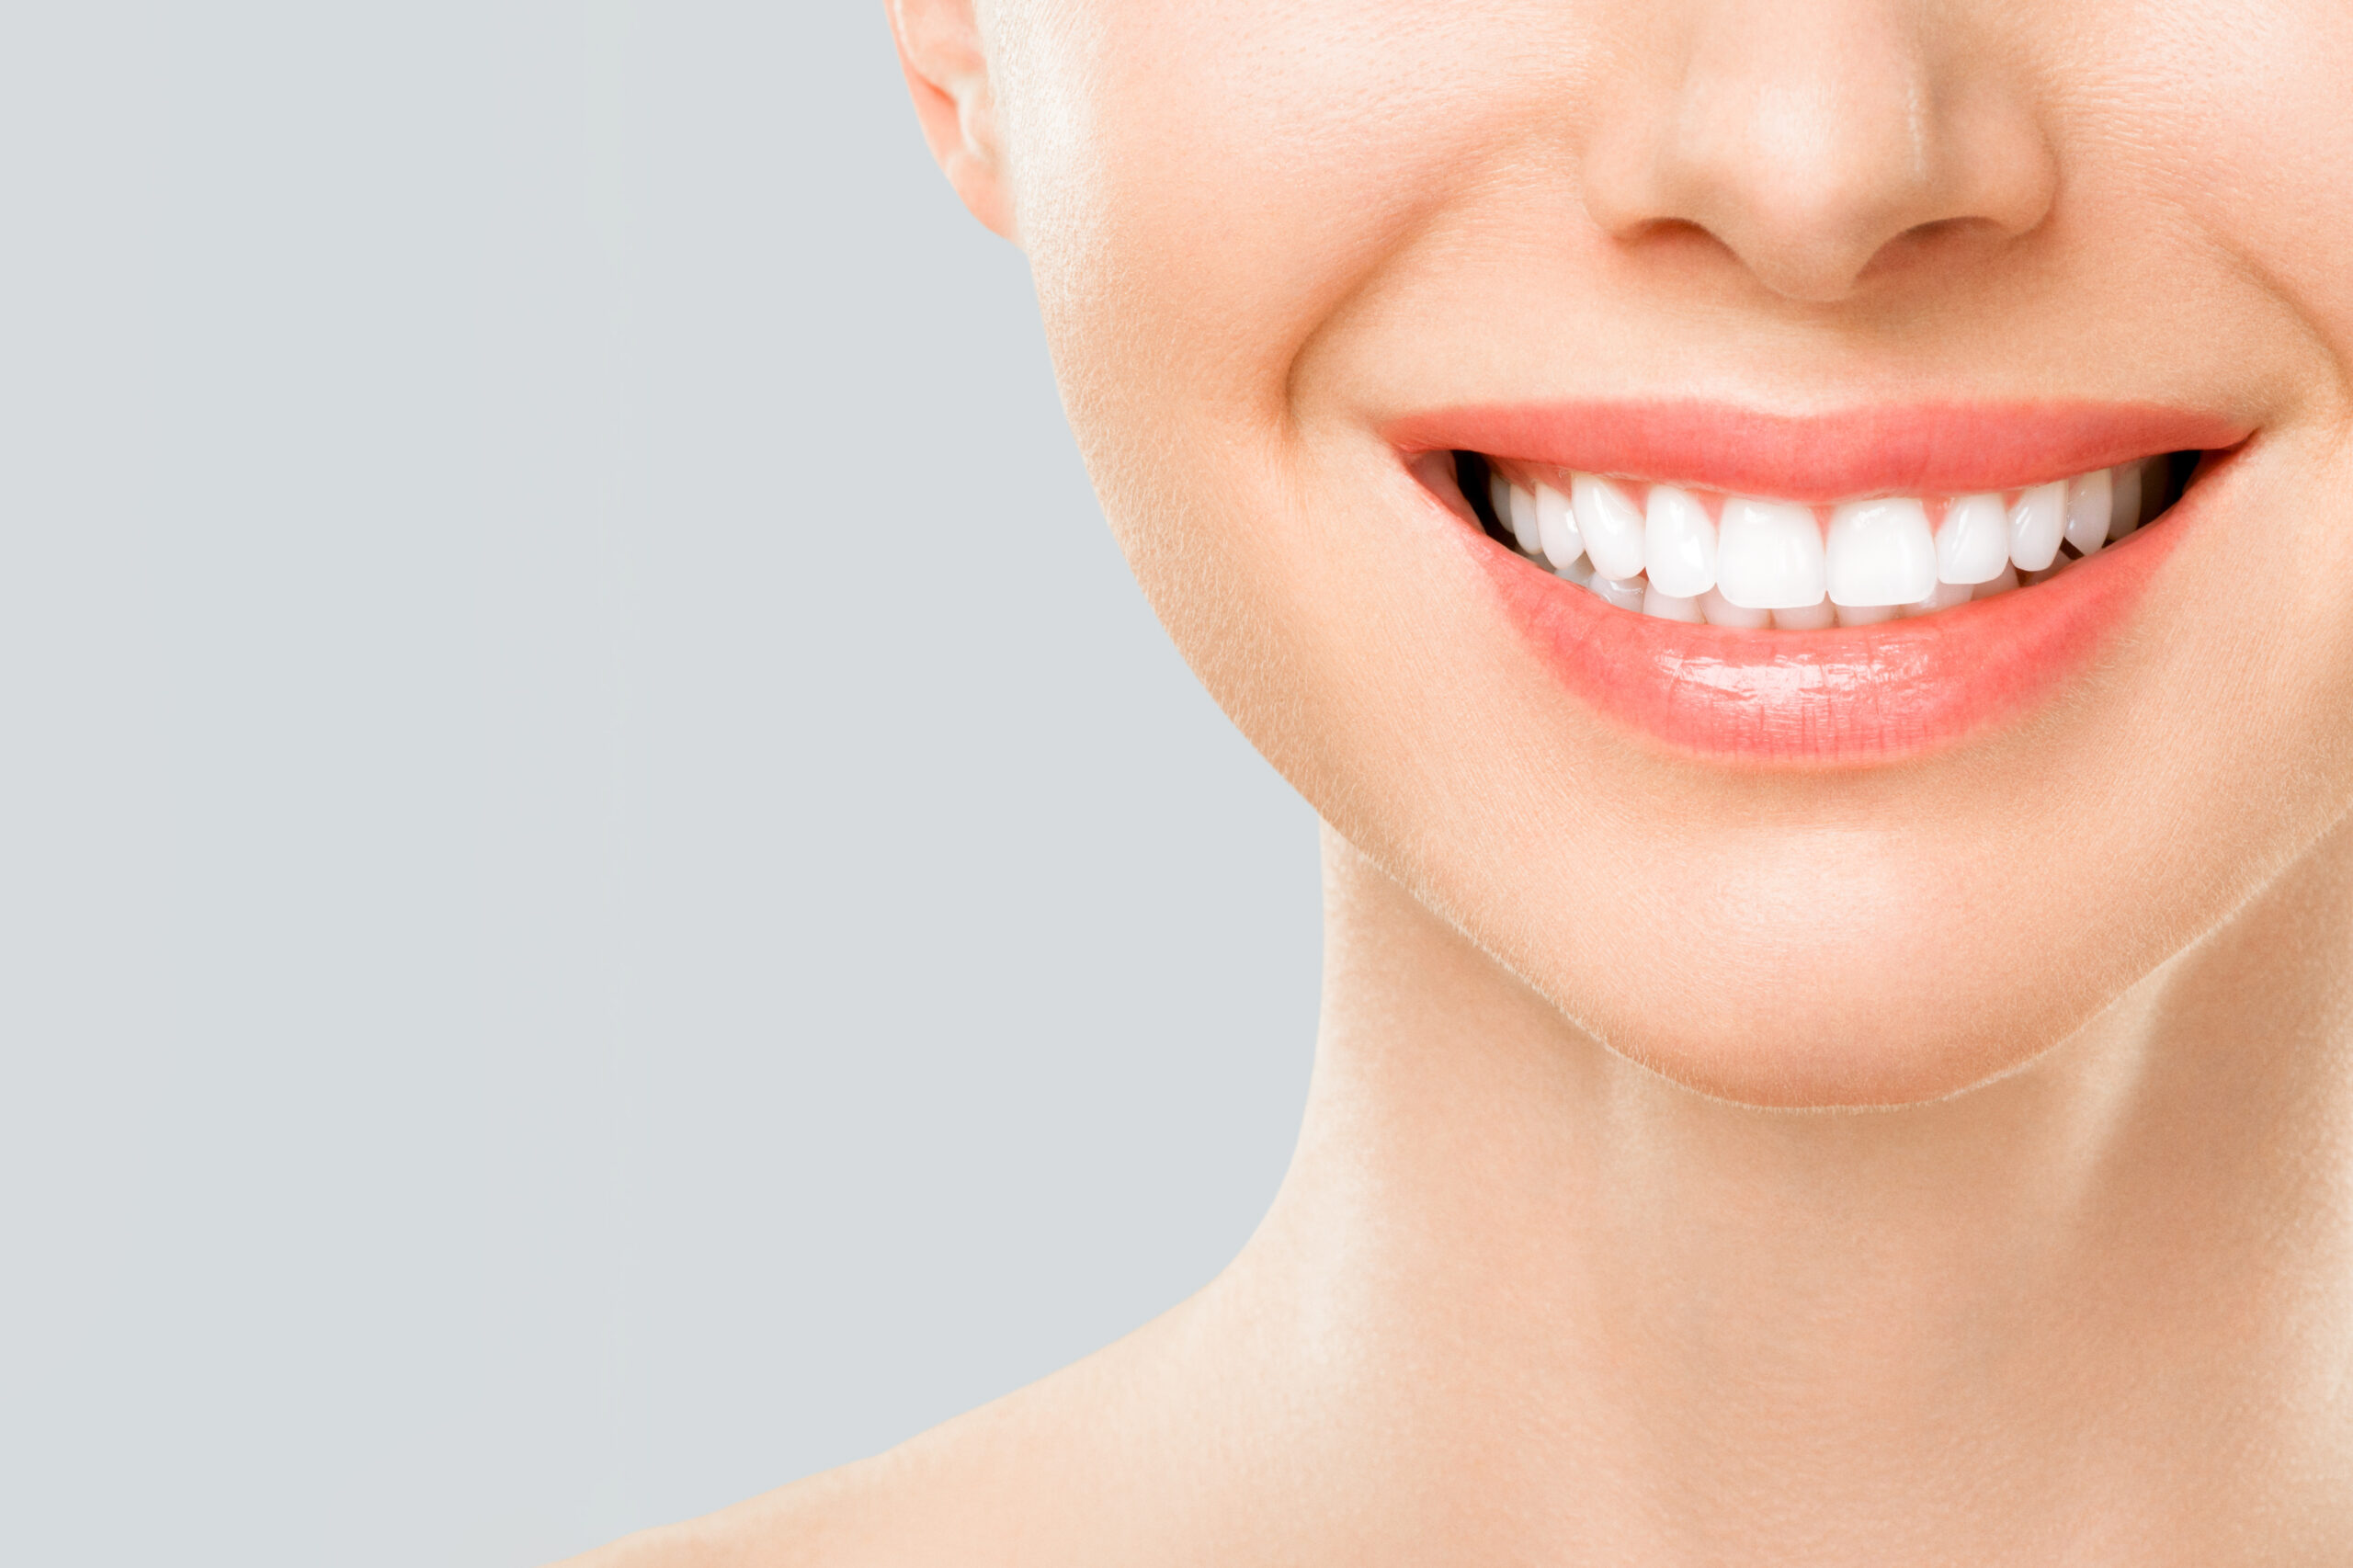 Perfect white teeth smile of a young woman. The result of the teeth whitening procedure. The image symbolizes oral care dentistry, Closeup on a white background.